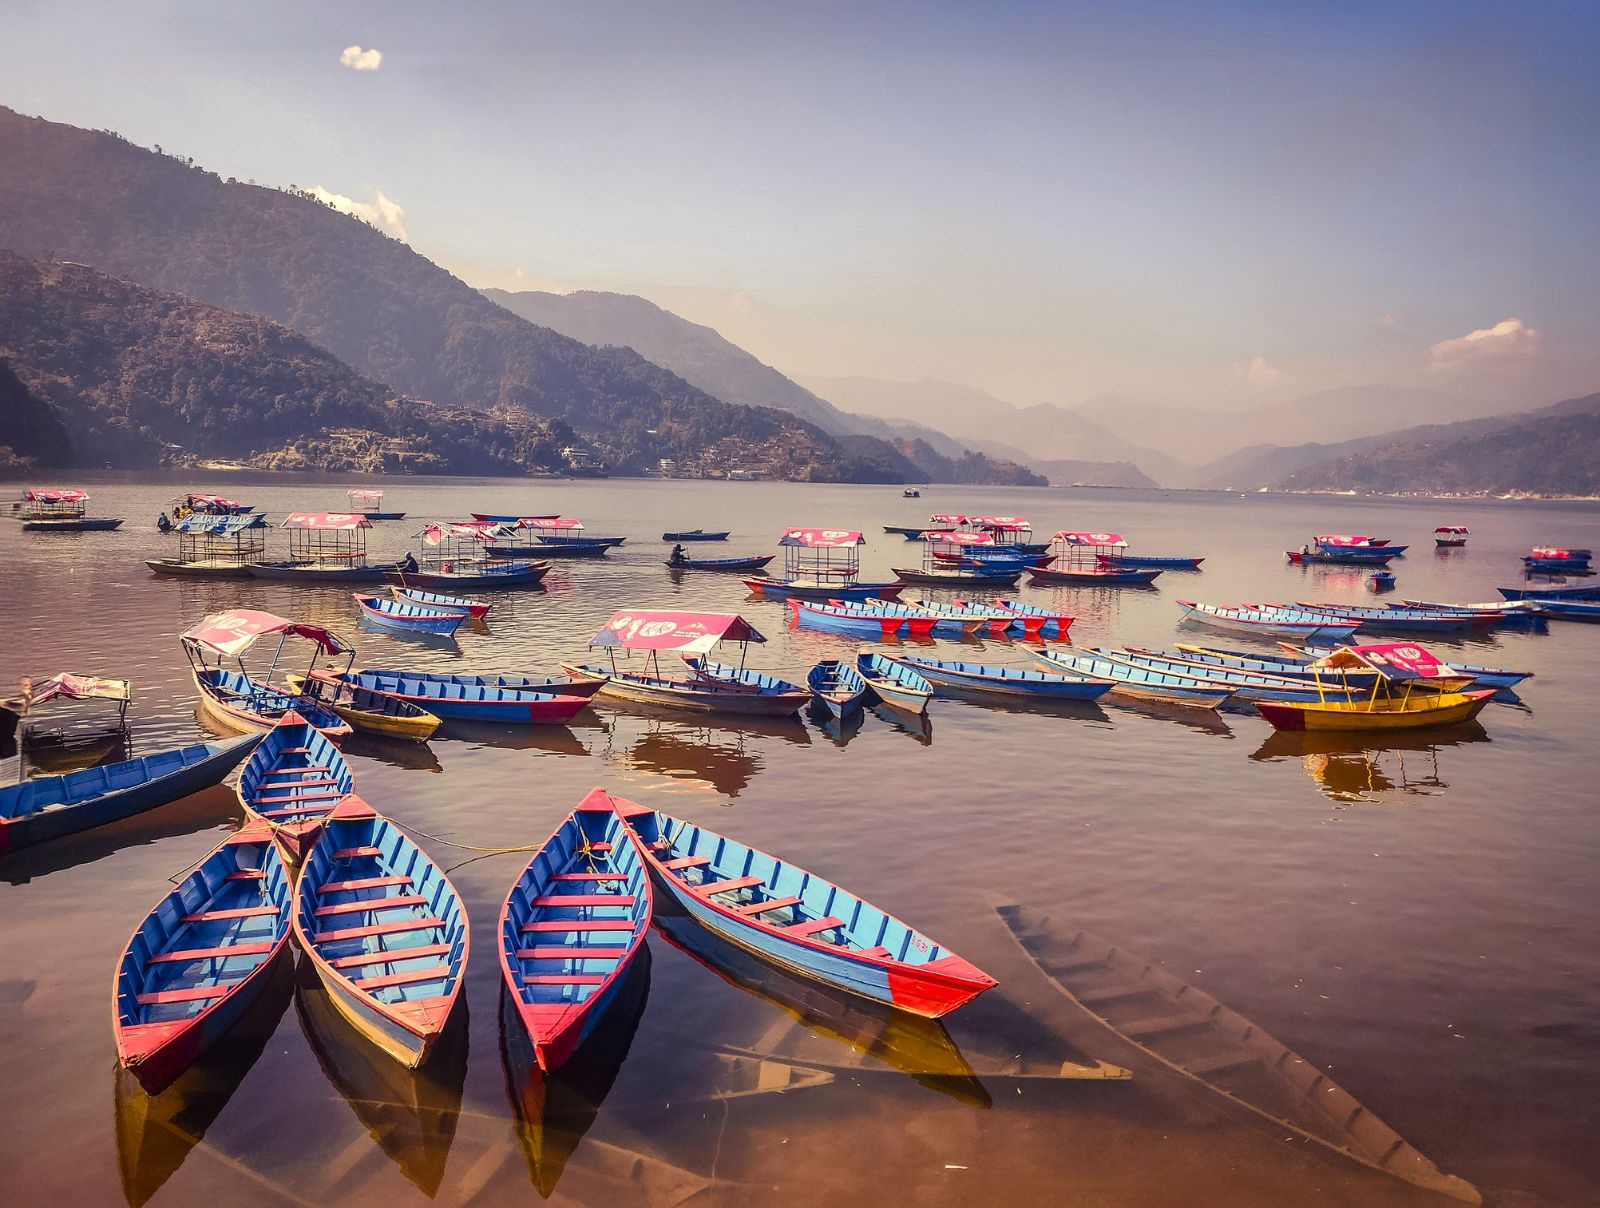 Boats moored in Pokhara